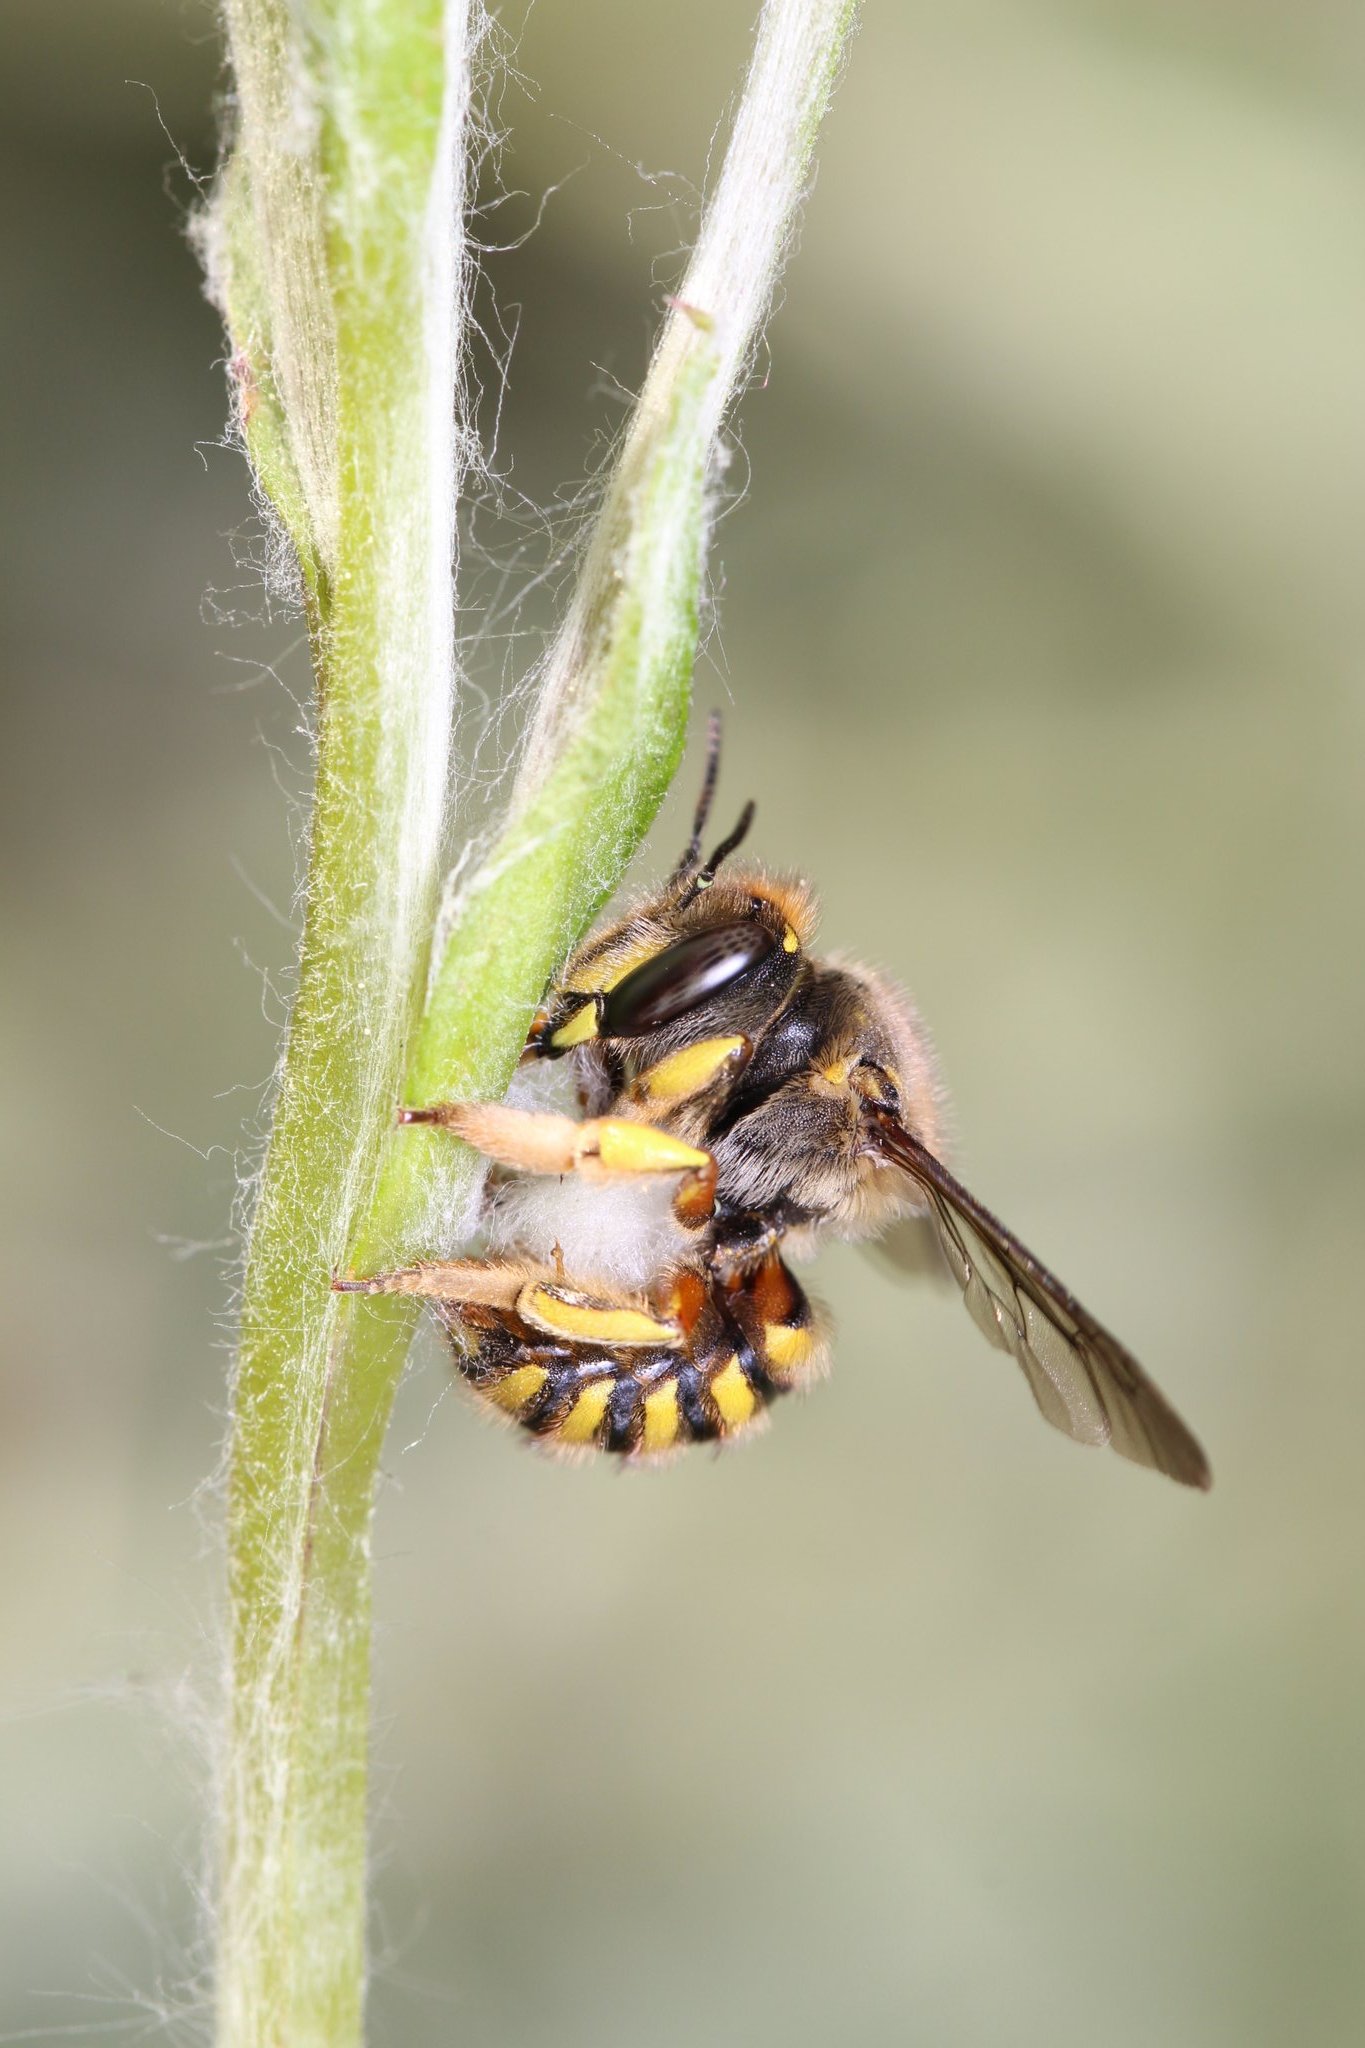 Casey Delphia on X: How much wool would a wool carder bee (Anthidium  manicatum) card, if a wool carder bee could card wool?   / X